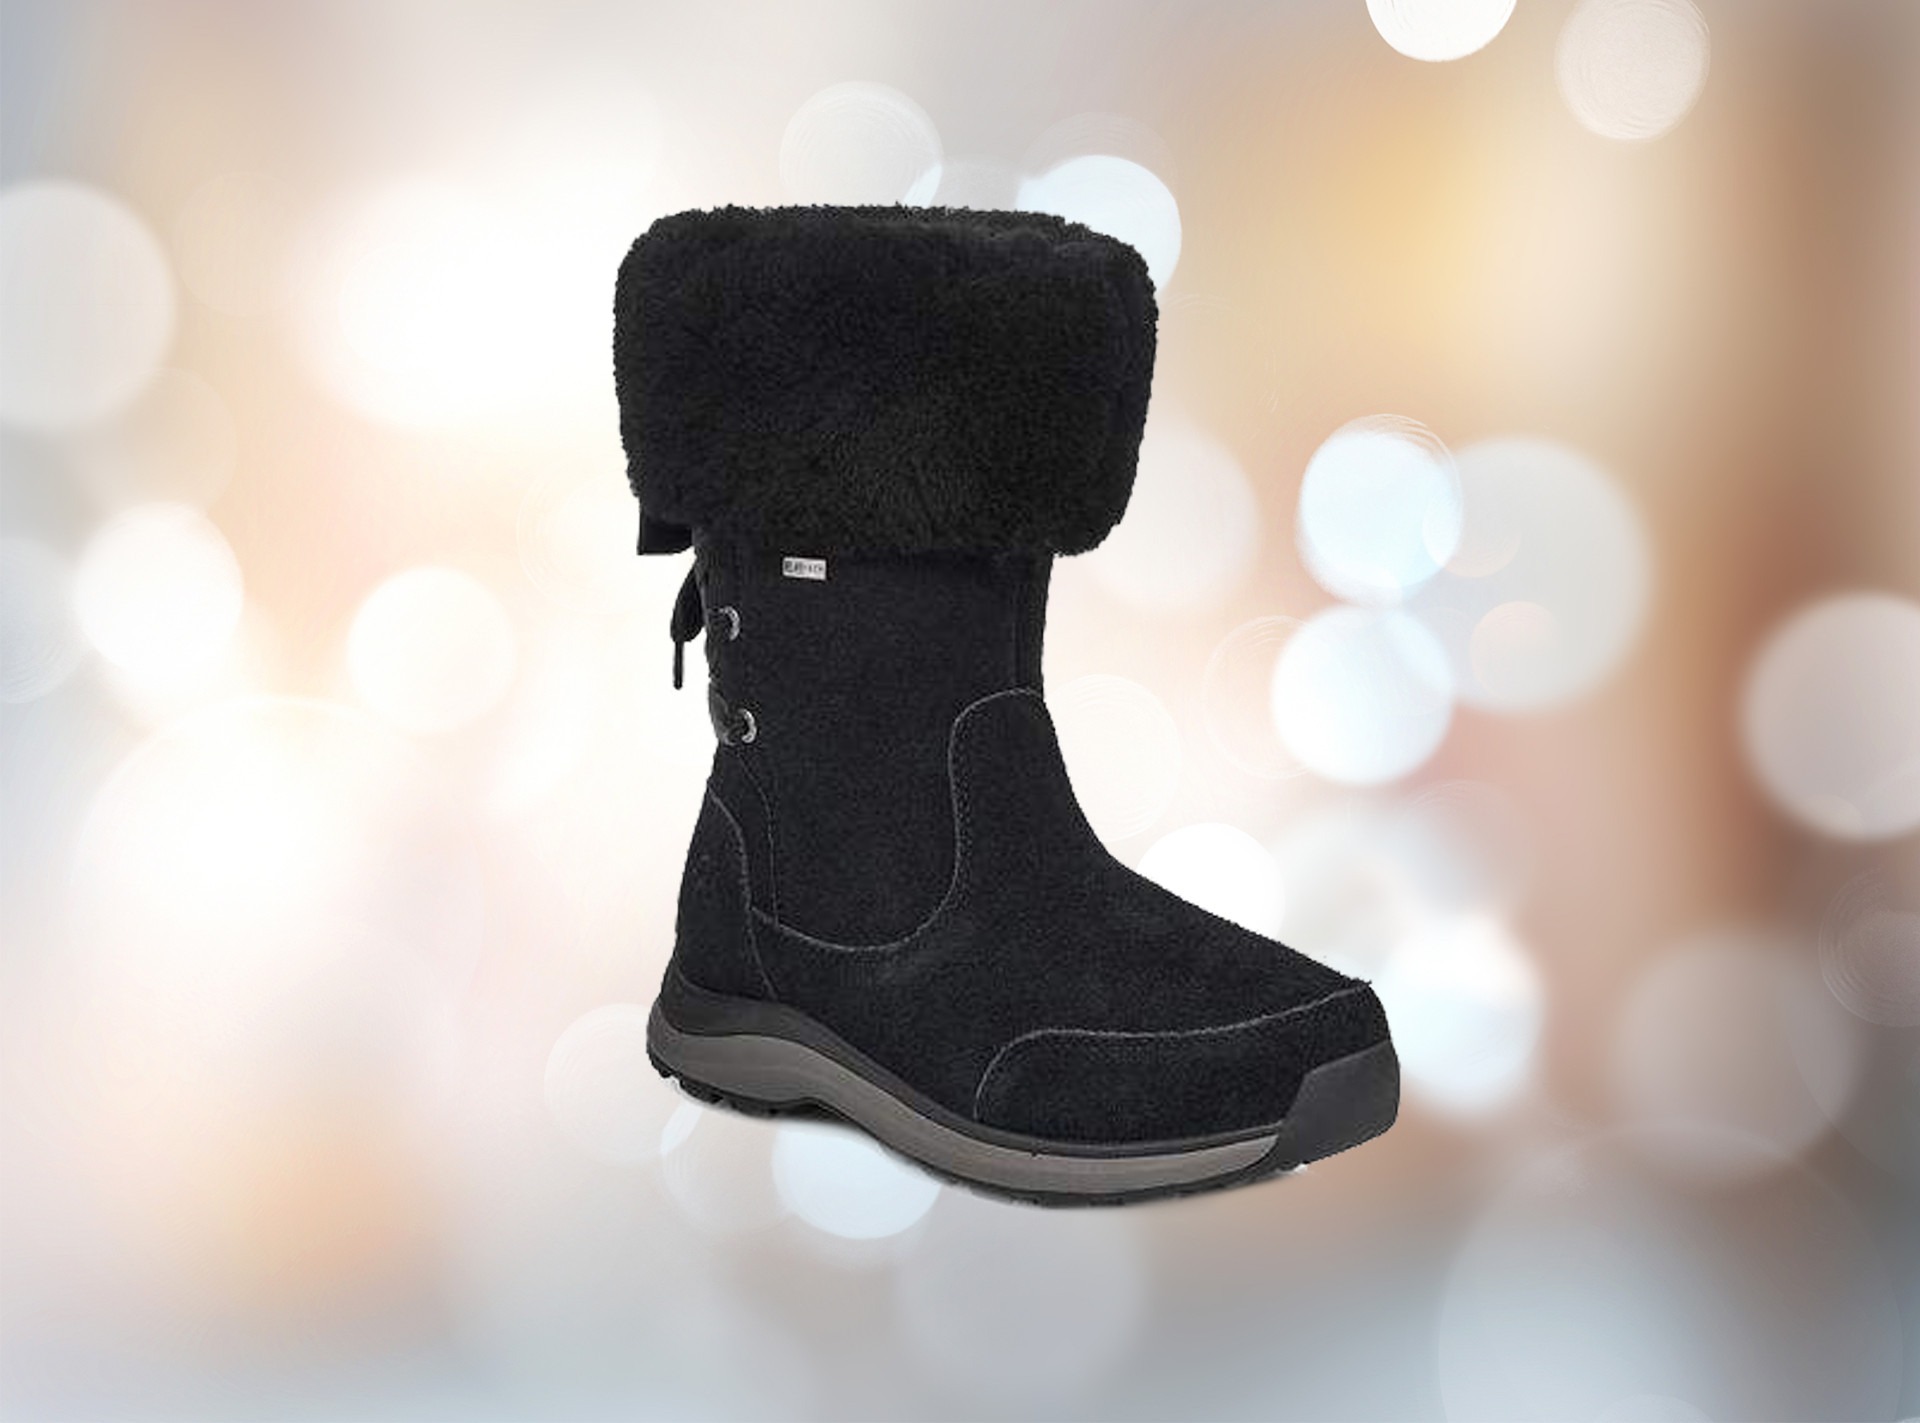 E-Comm, This Pair of Uggs is 40% off